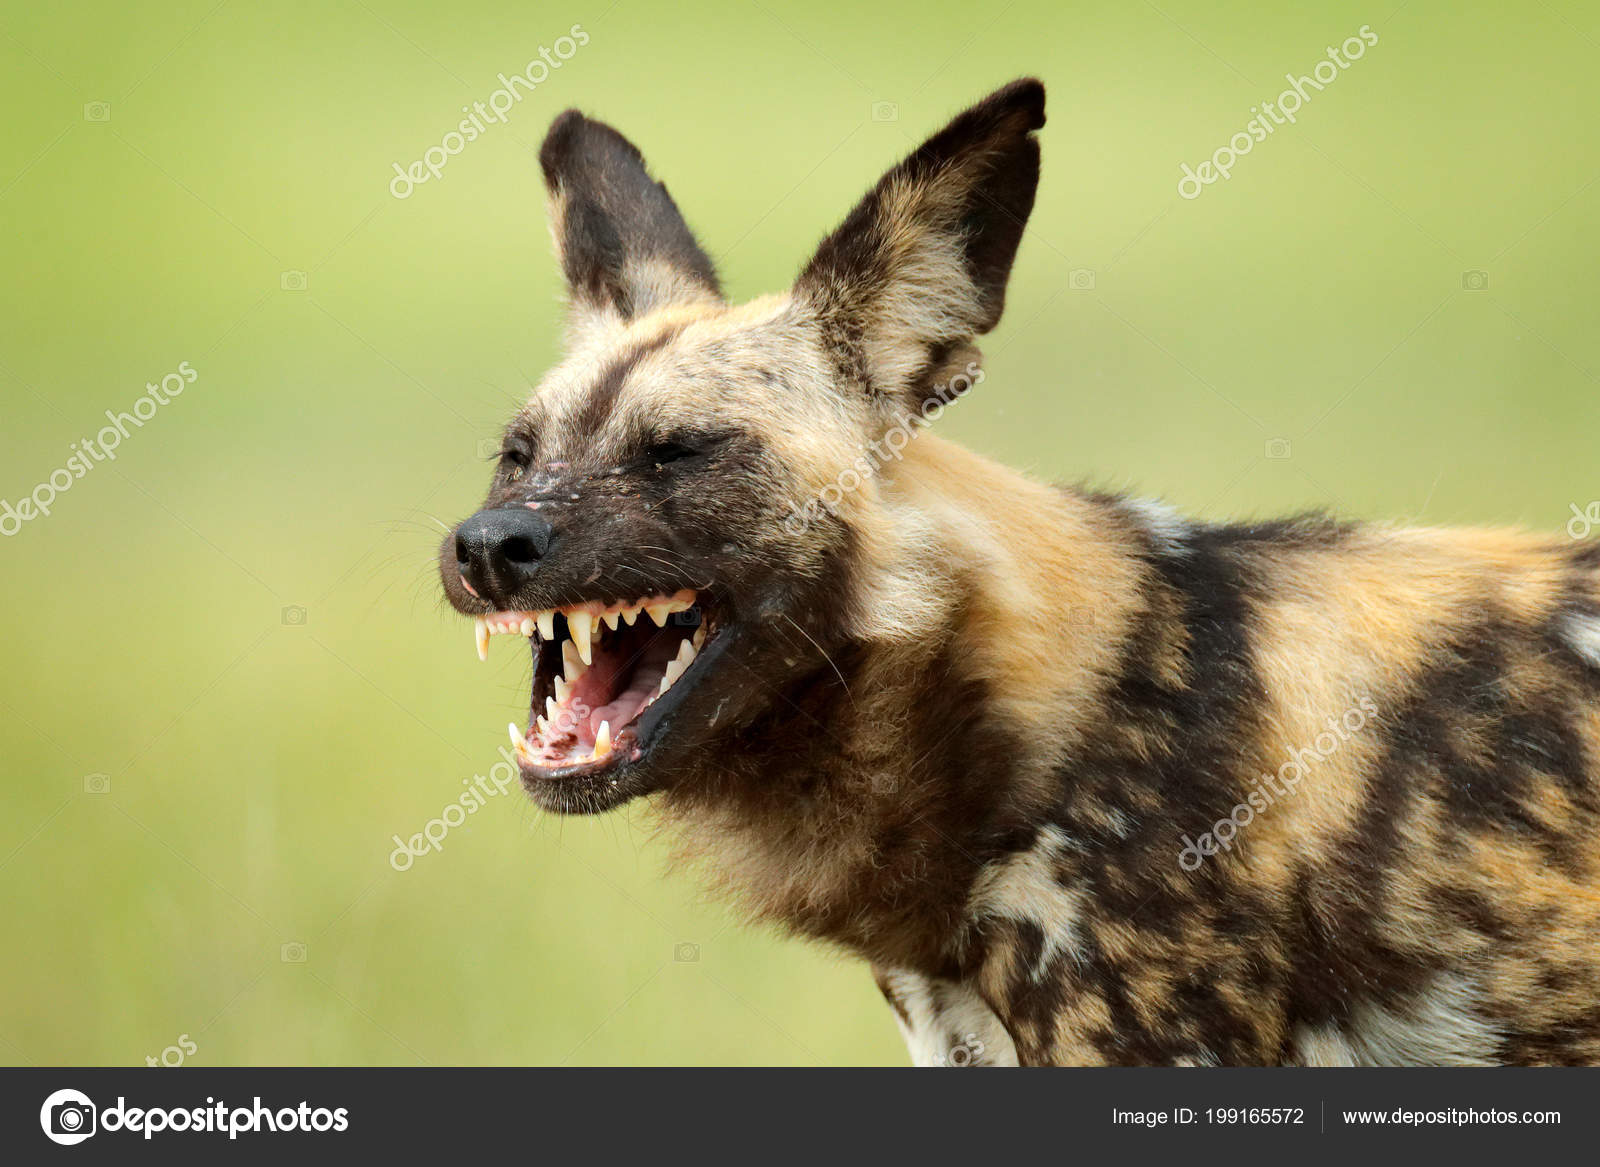 where can you find wild dogs